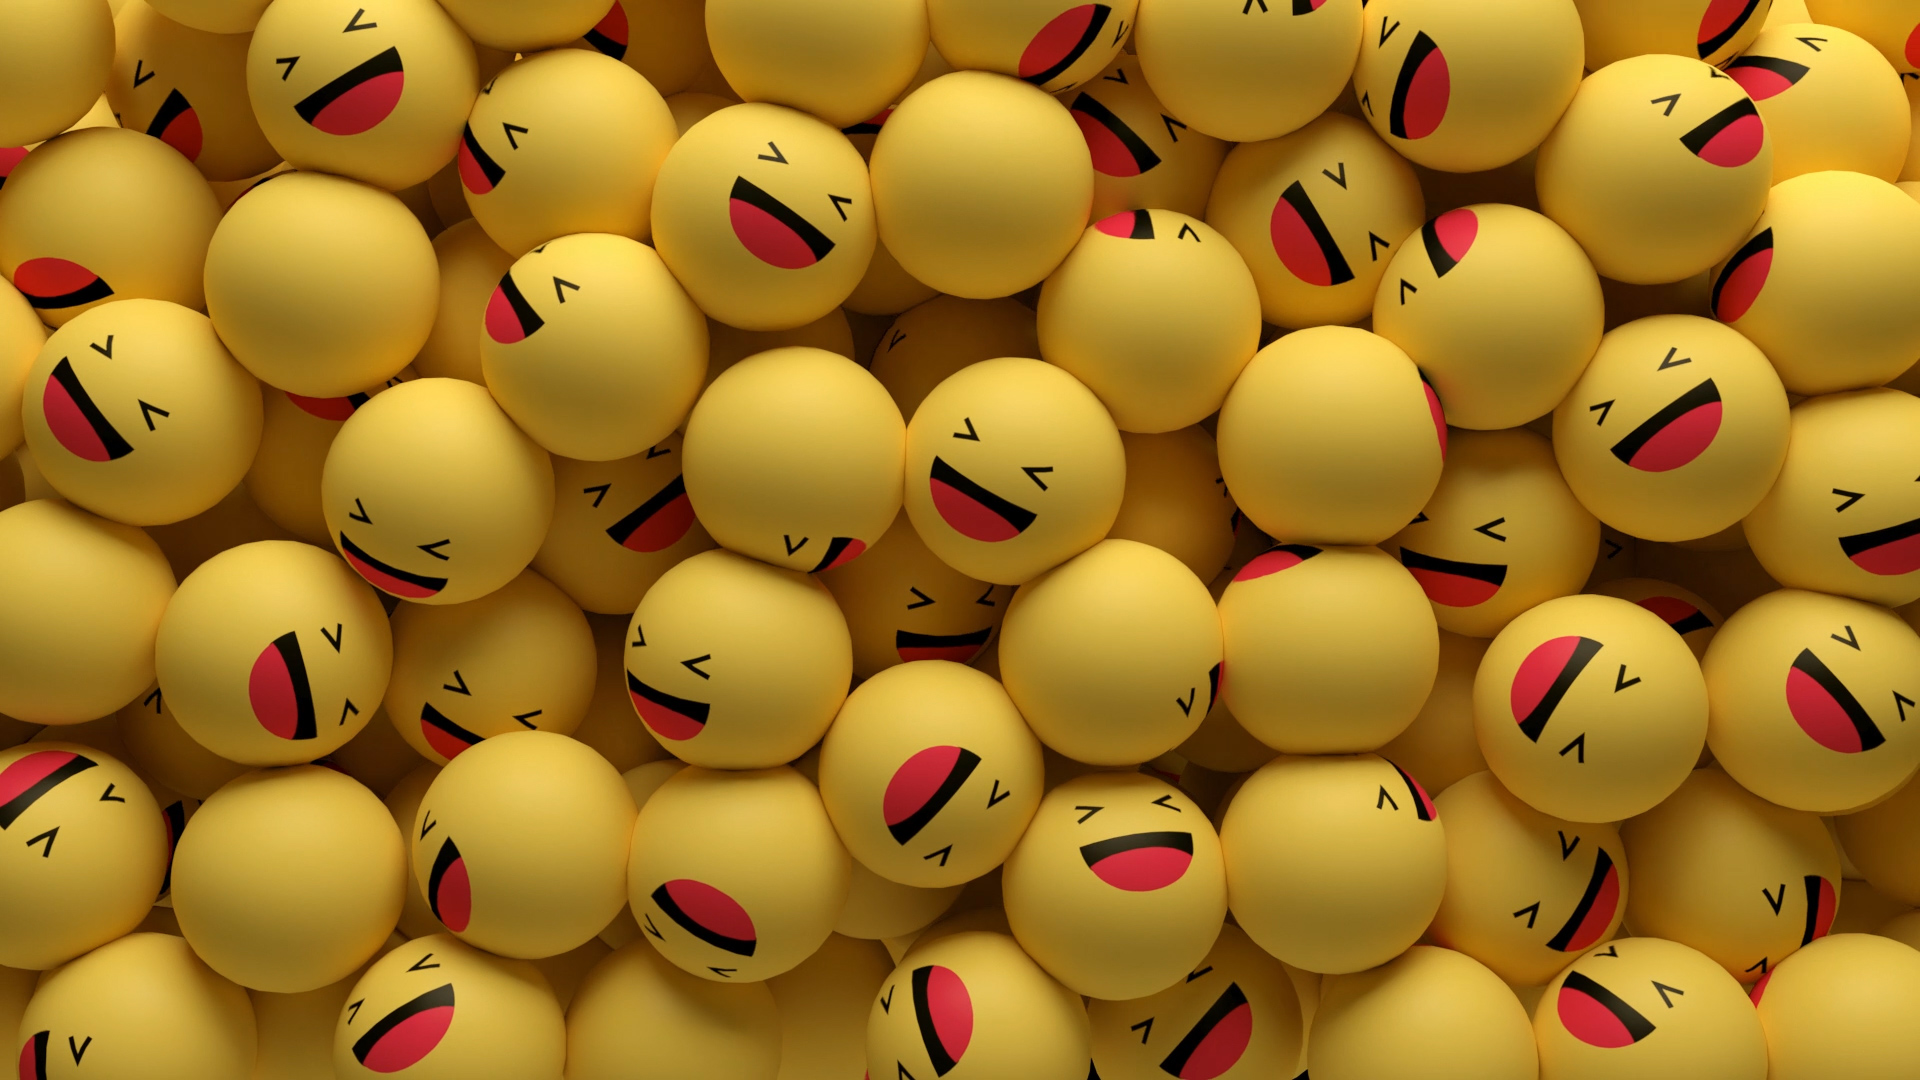 Download Happy Laughing Emoji 3D wallpaper, Download free amazing High  Resolution backgrounds, images | CorelDraw Design (Download Free CDR,  Vector, Stock Images, Tutorials, Tips & Tricks)